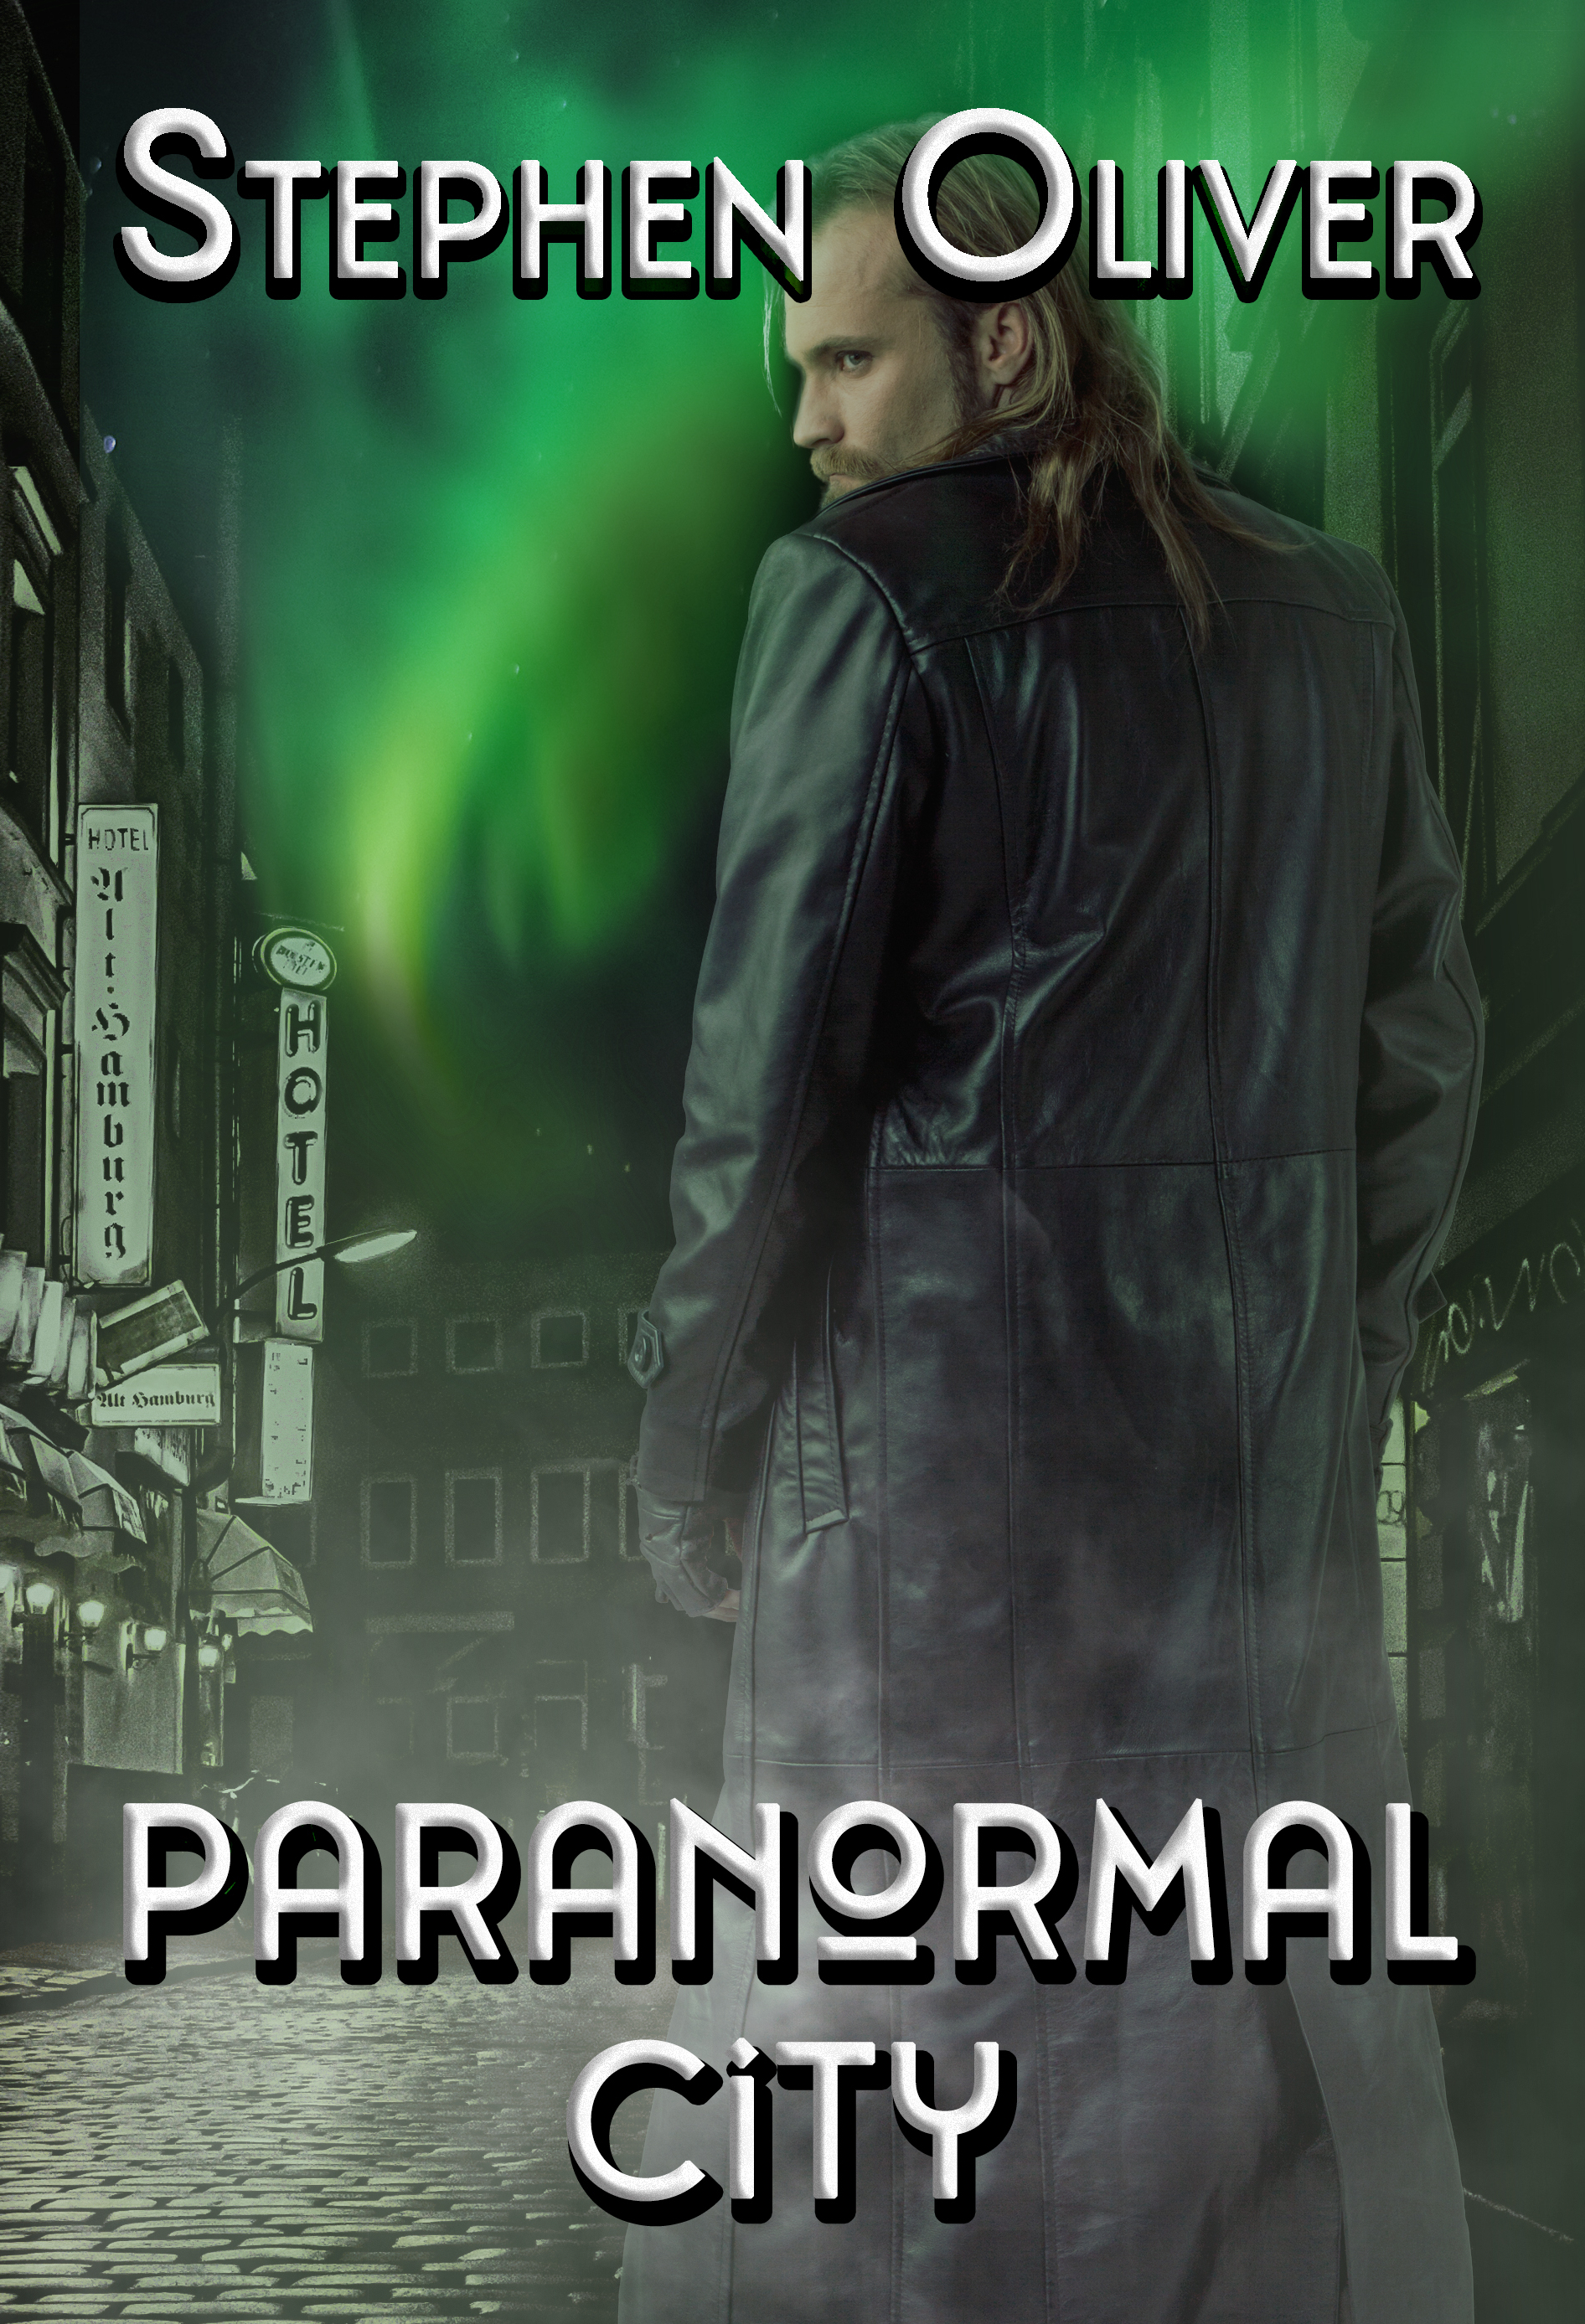 Ready for an all-new Urban Fantasy that you’re sure to love? Paranormal City goes live this Friday!